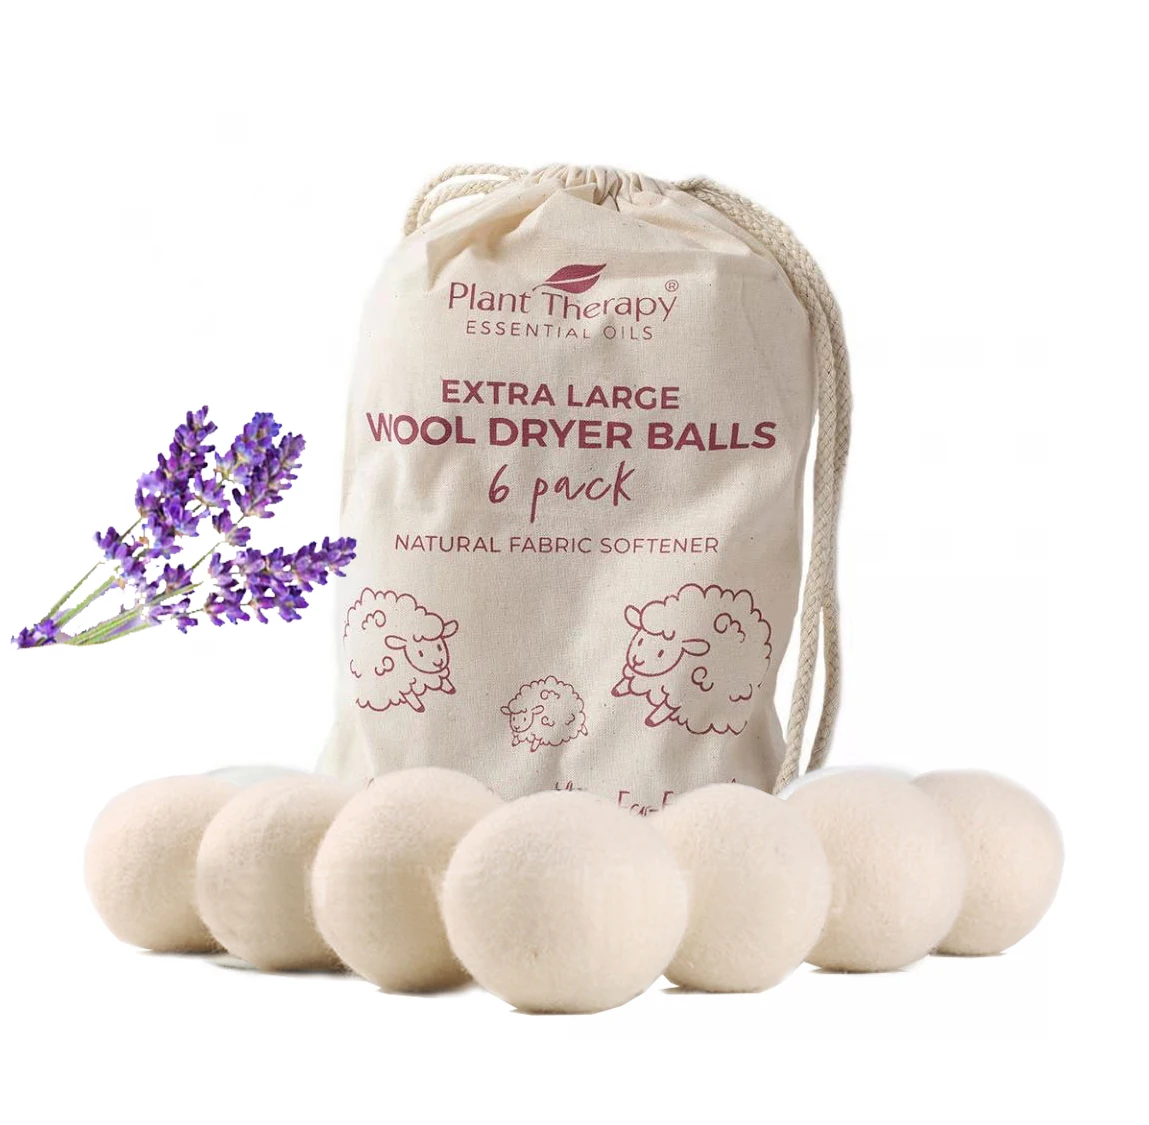 

Organic Wool Dryer Balls Dogs 6 XL Premium Quality Reusable Natural Fabric Softener 100% Hand Made New Zealand Merino Wool, Customized color